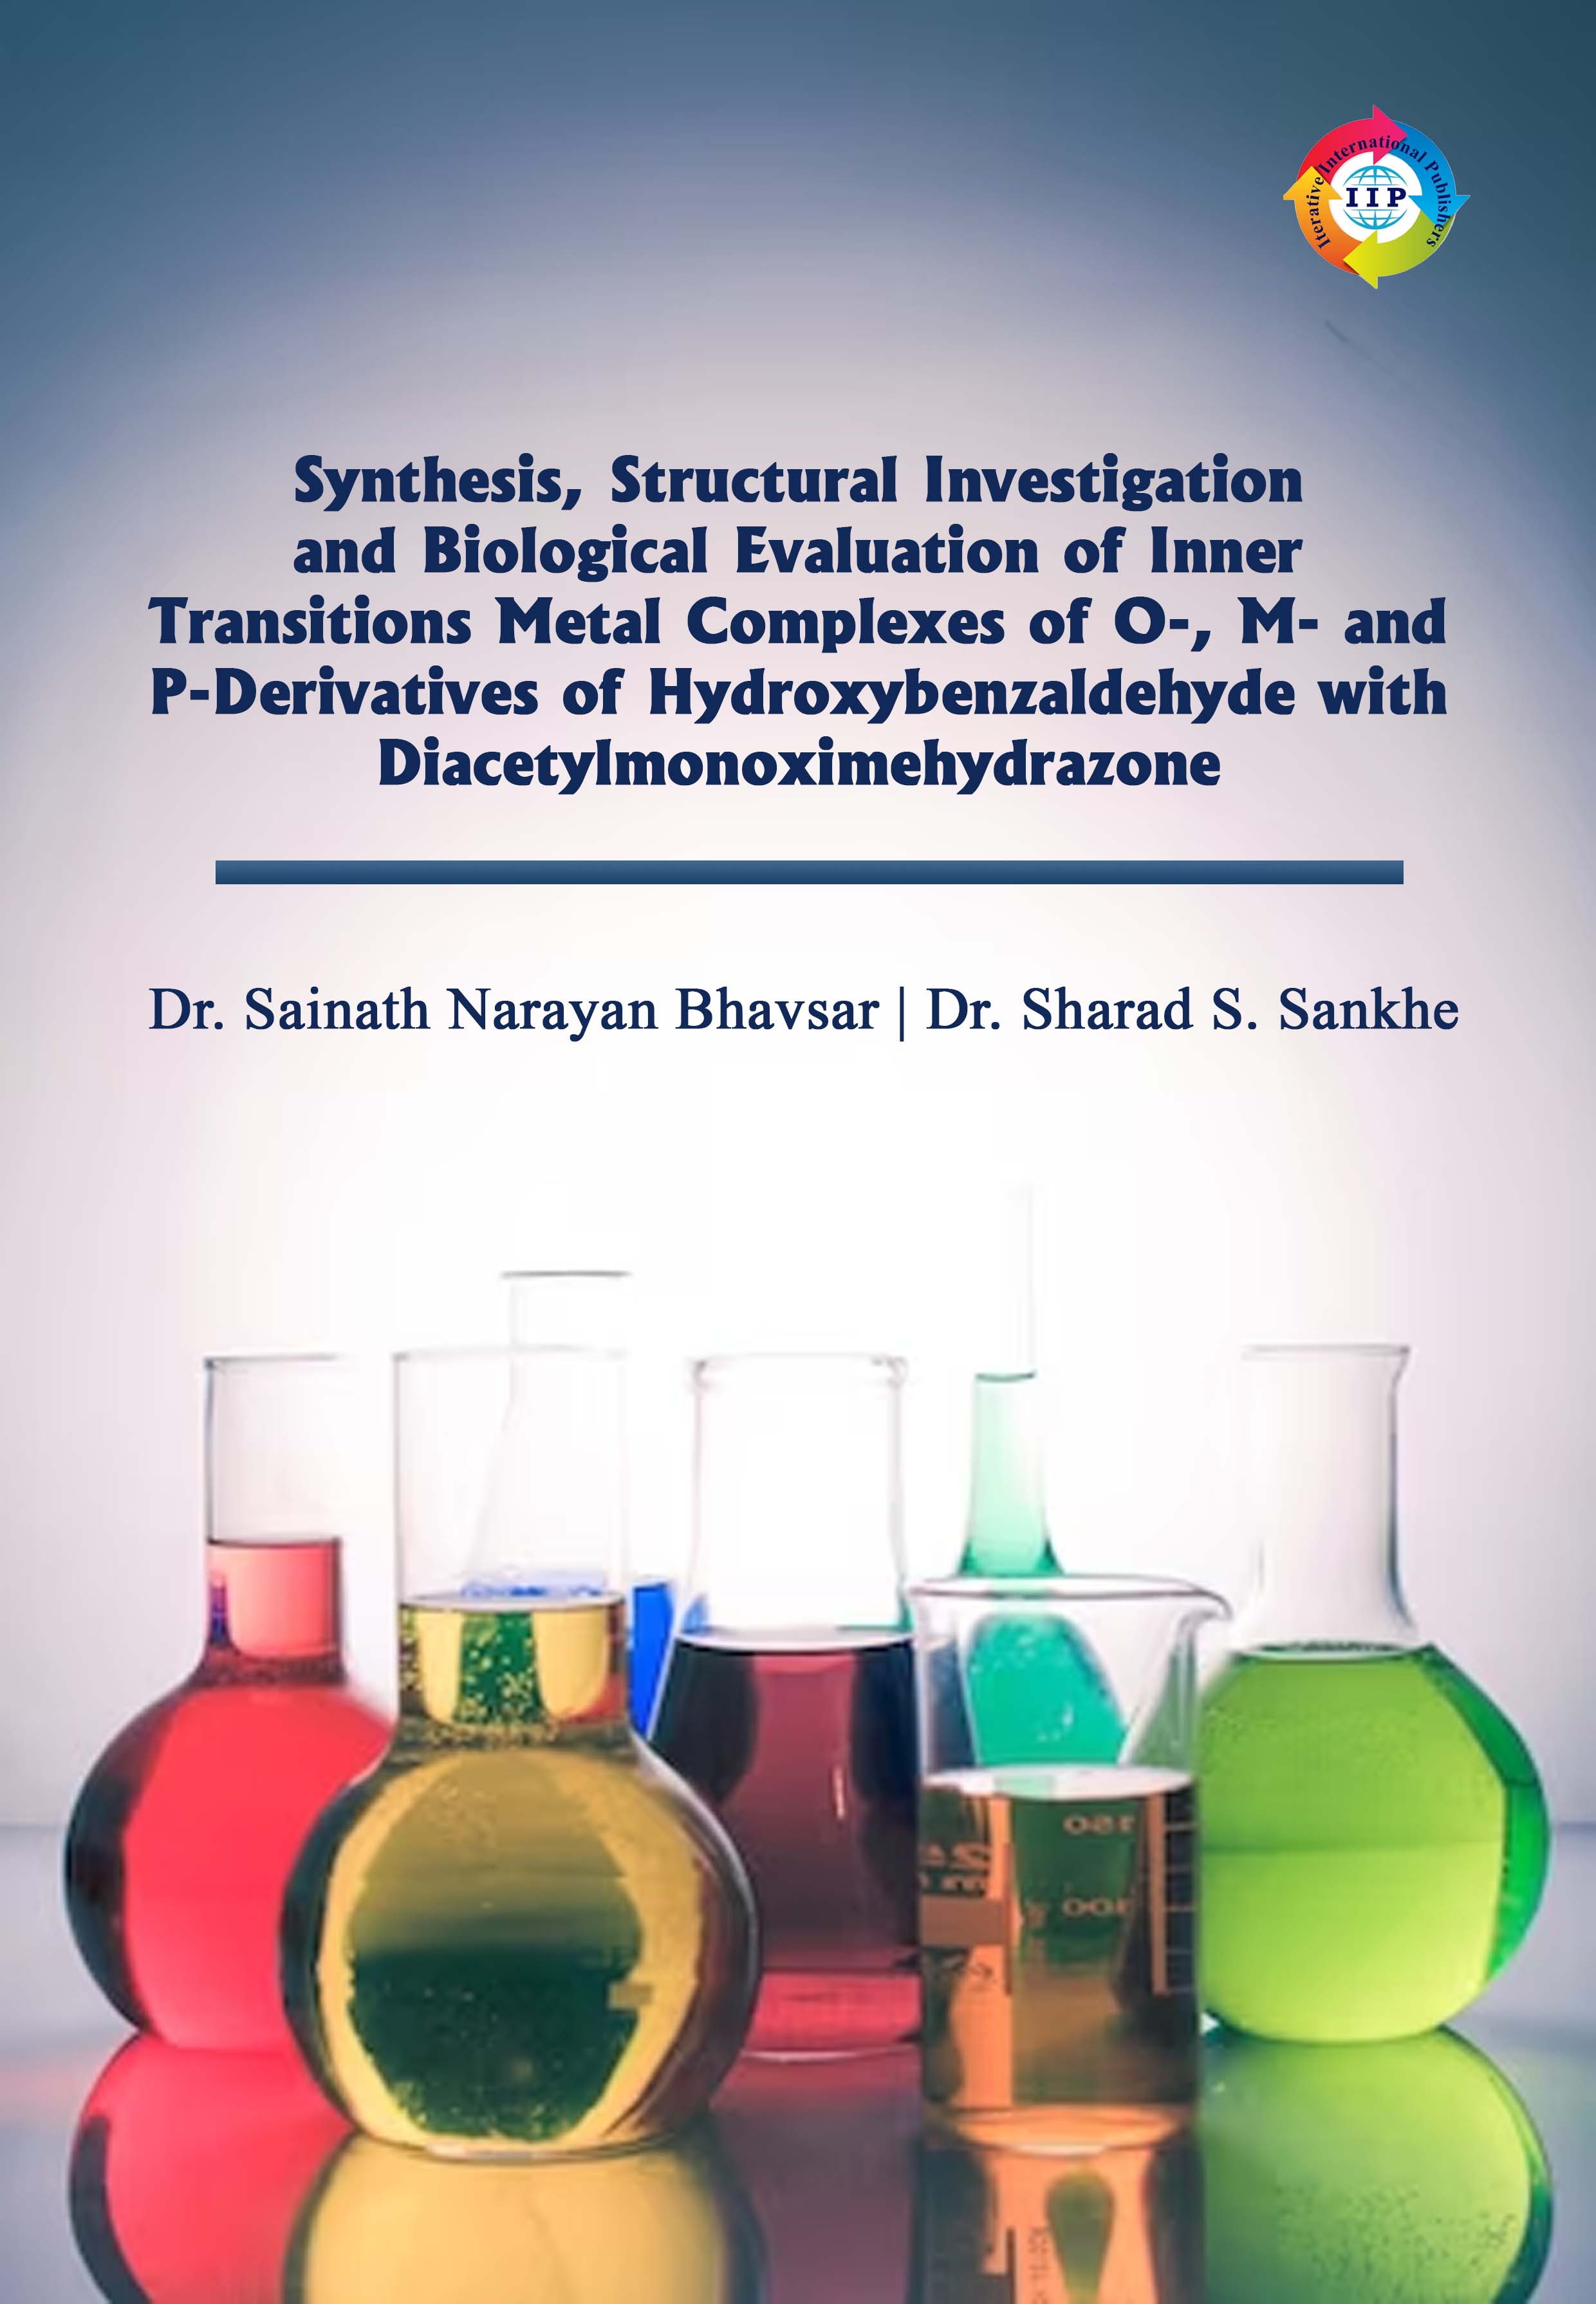 SYNTHESIS, STRUCTURAL INVESTIGATION AND BIOLOGICAL EVALUATION OF INNER TRANSITIONS METAL COMPLEXES OF O-, M- AND P-DERIVATIVES OF HYDROXYBENZALDEHYDE WITH DIACETYLMONOXIMEHYDRAZONE